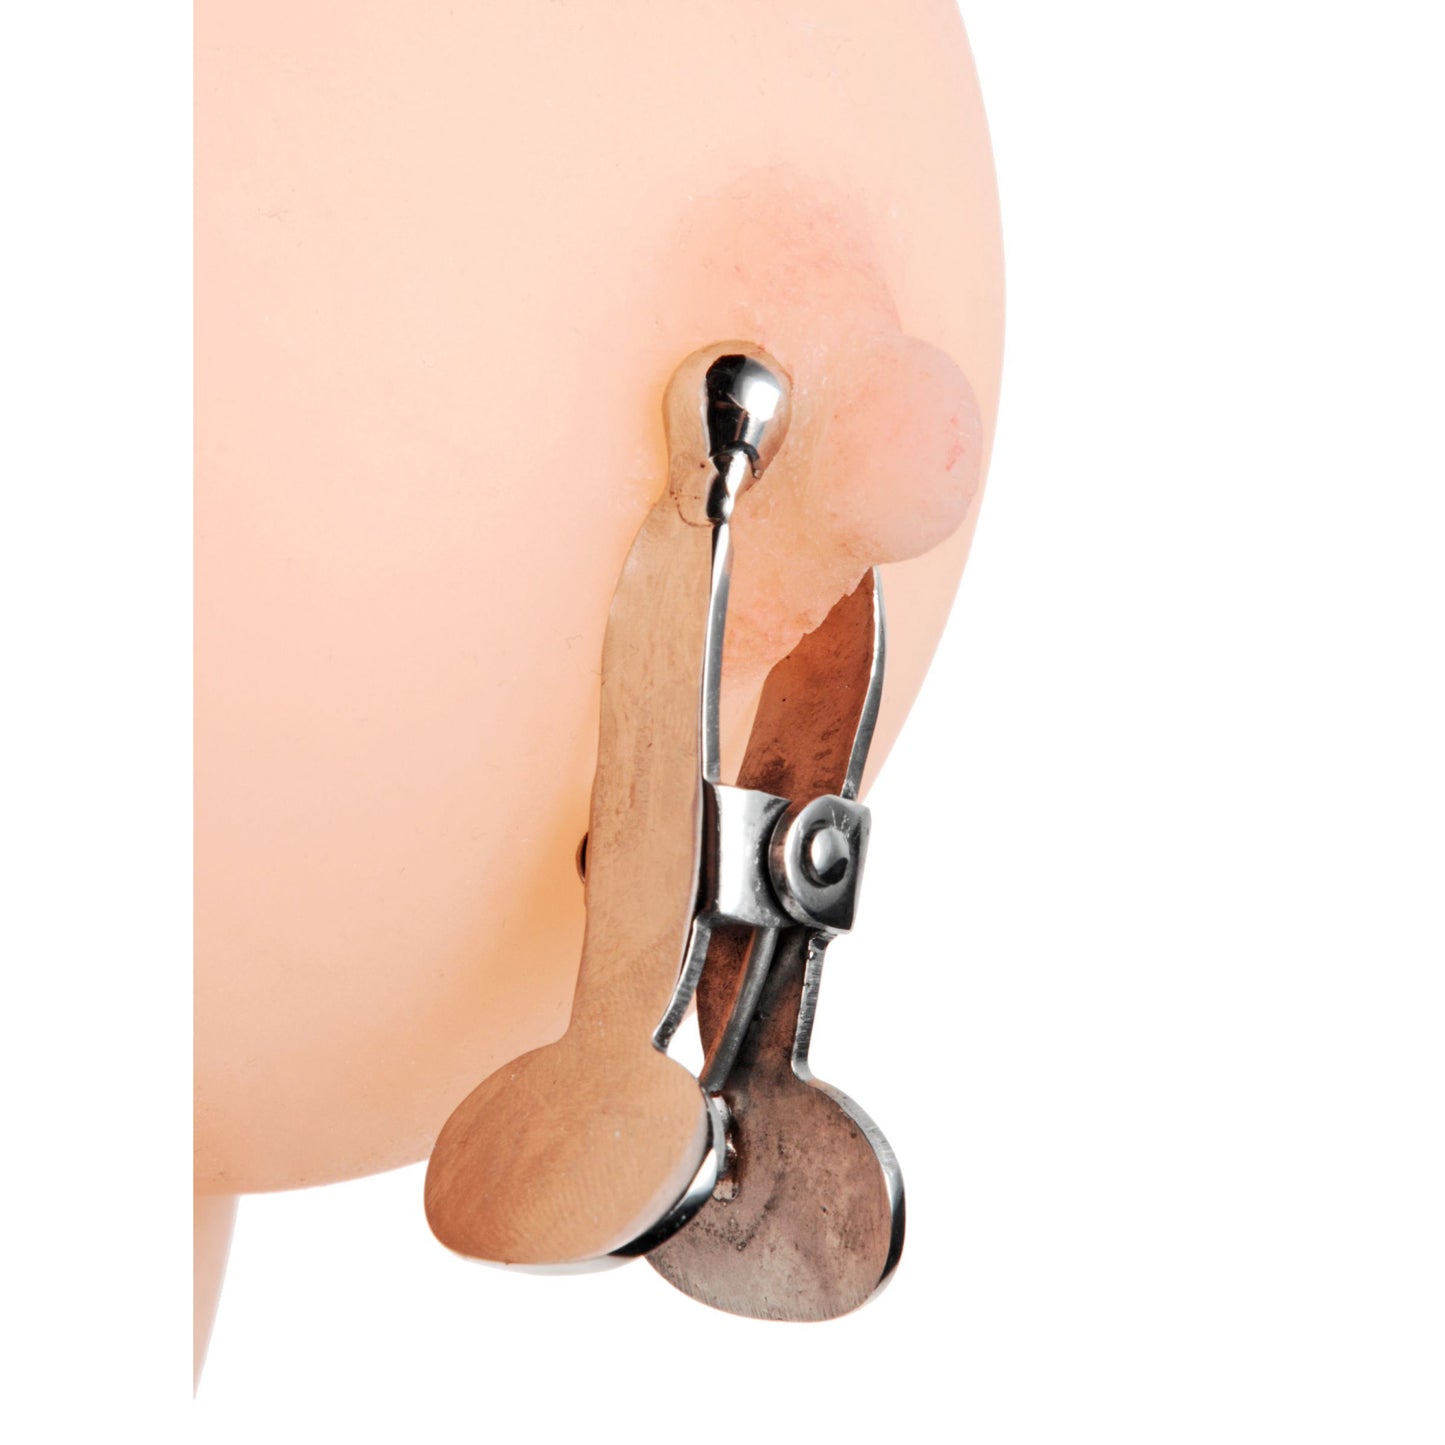 Stainless Steel Ball-Tipped Nipple Clamps - UABDSM